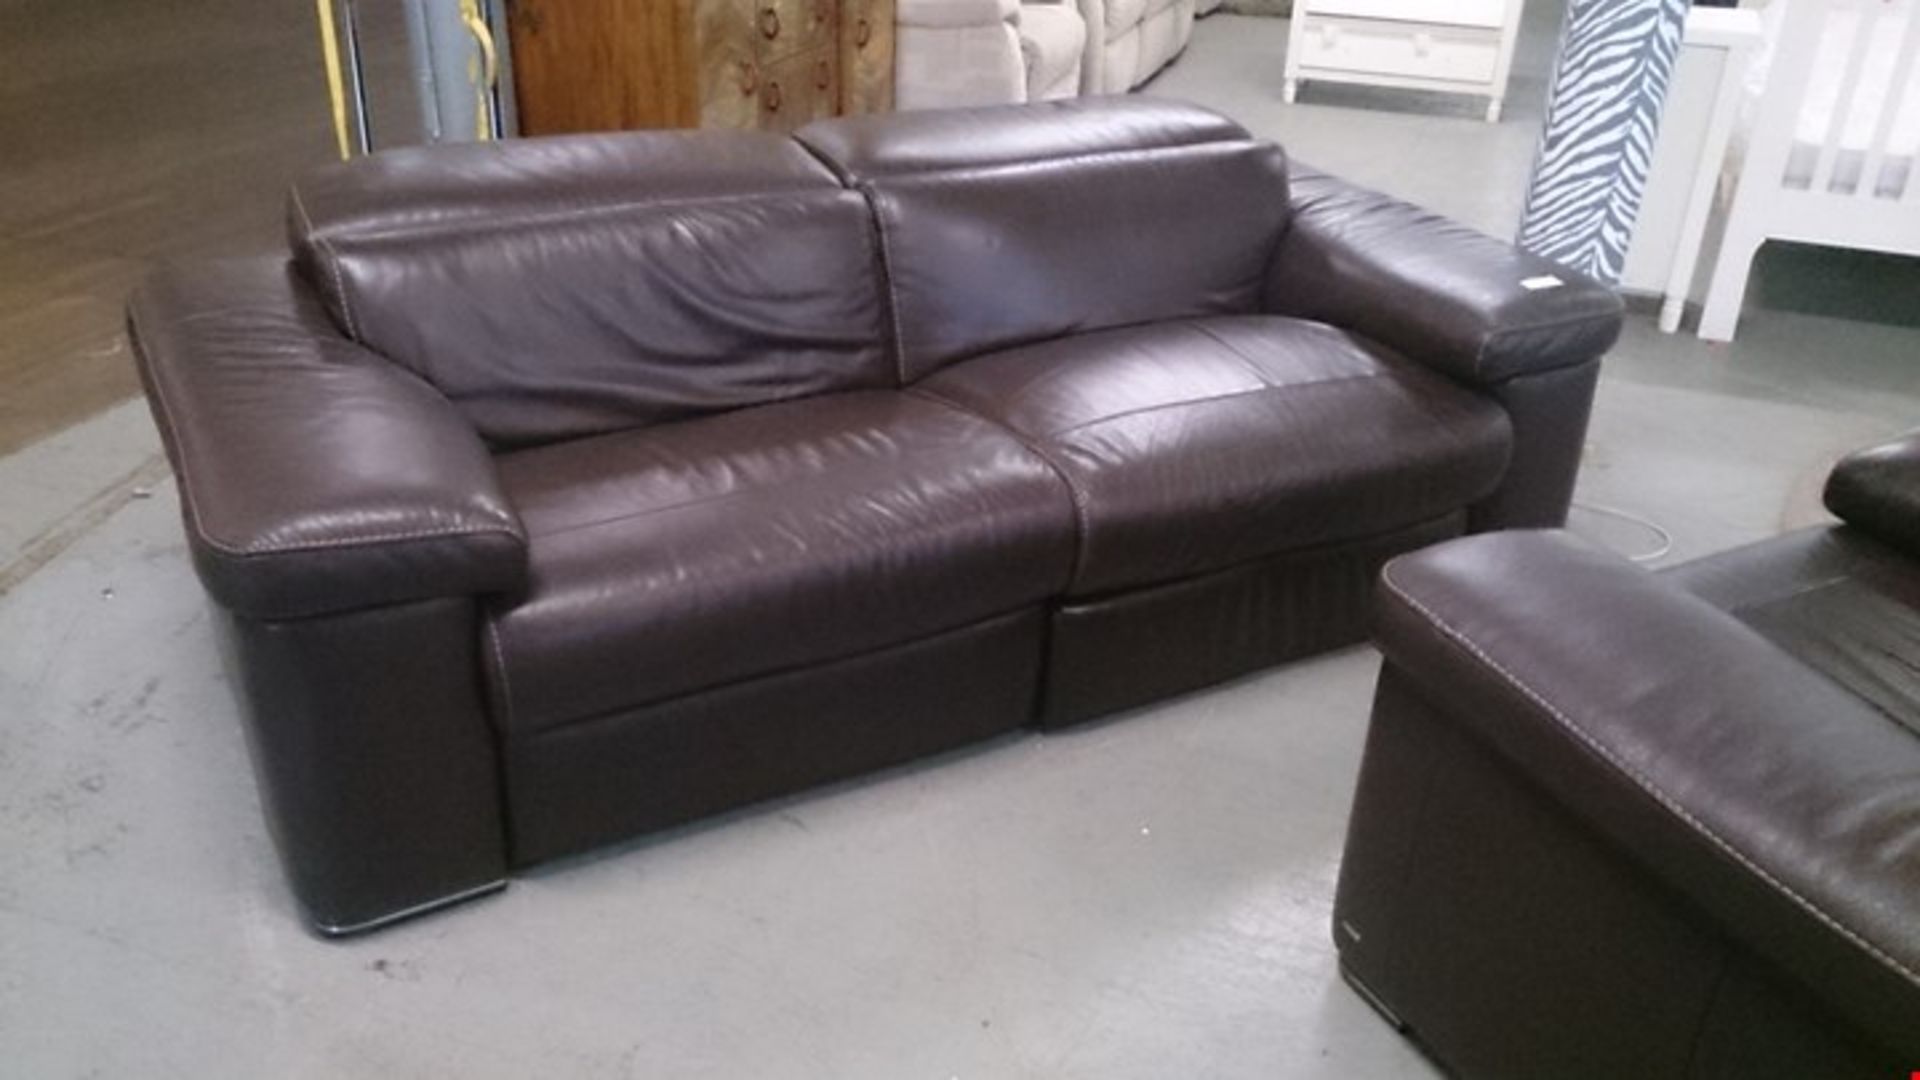 DESIGNER ITALIAN MADE MICENOBROWN LEATHER ELECTIC RECLINING 3 SEATER SOFA AND A MANUAL RECLININ...